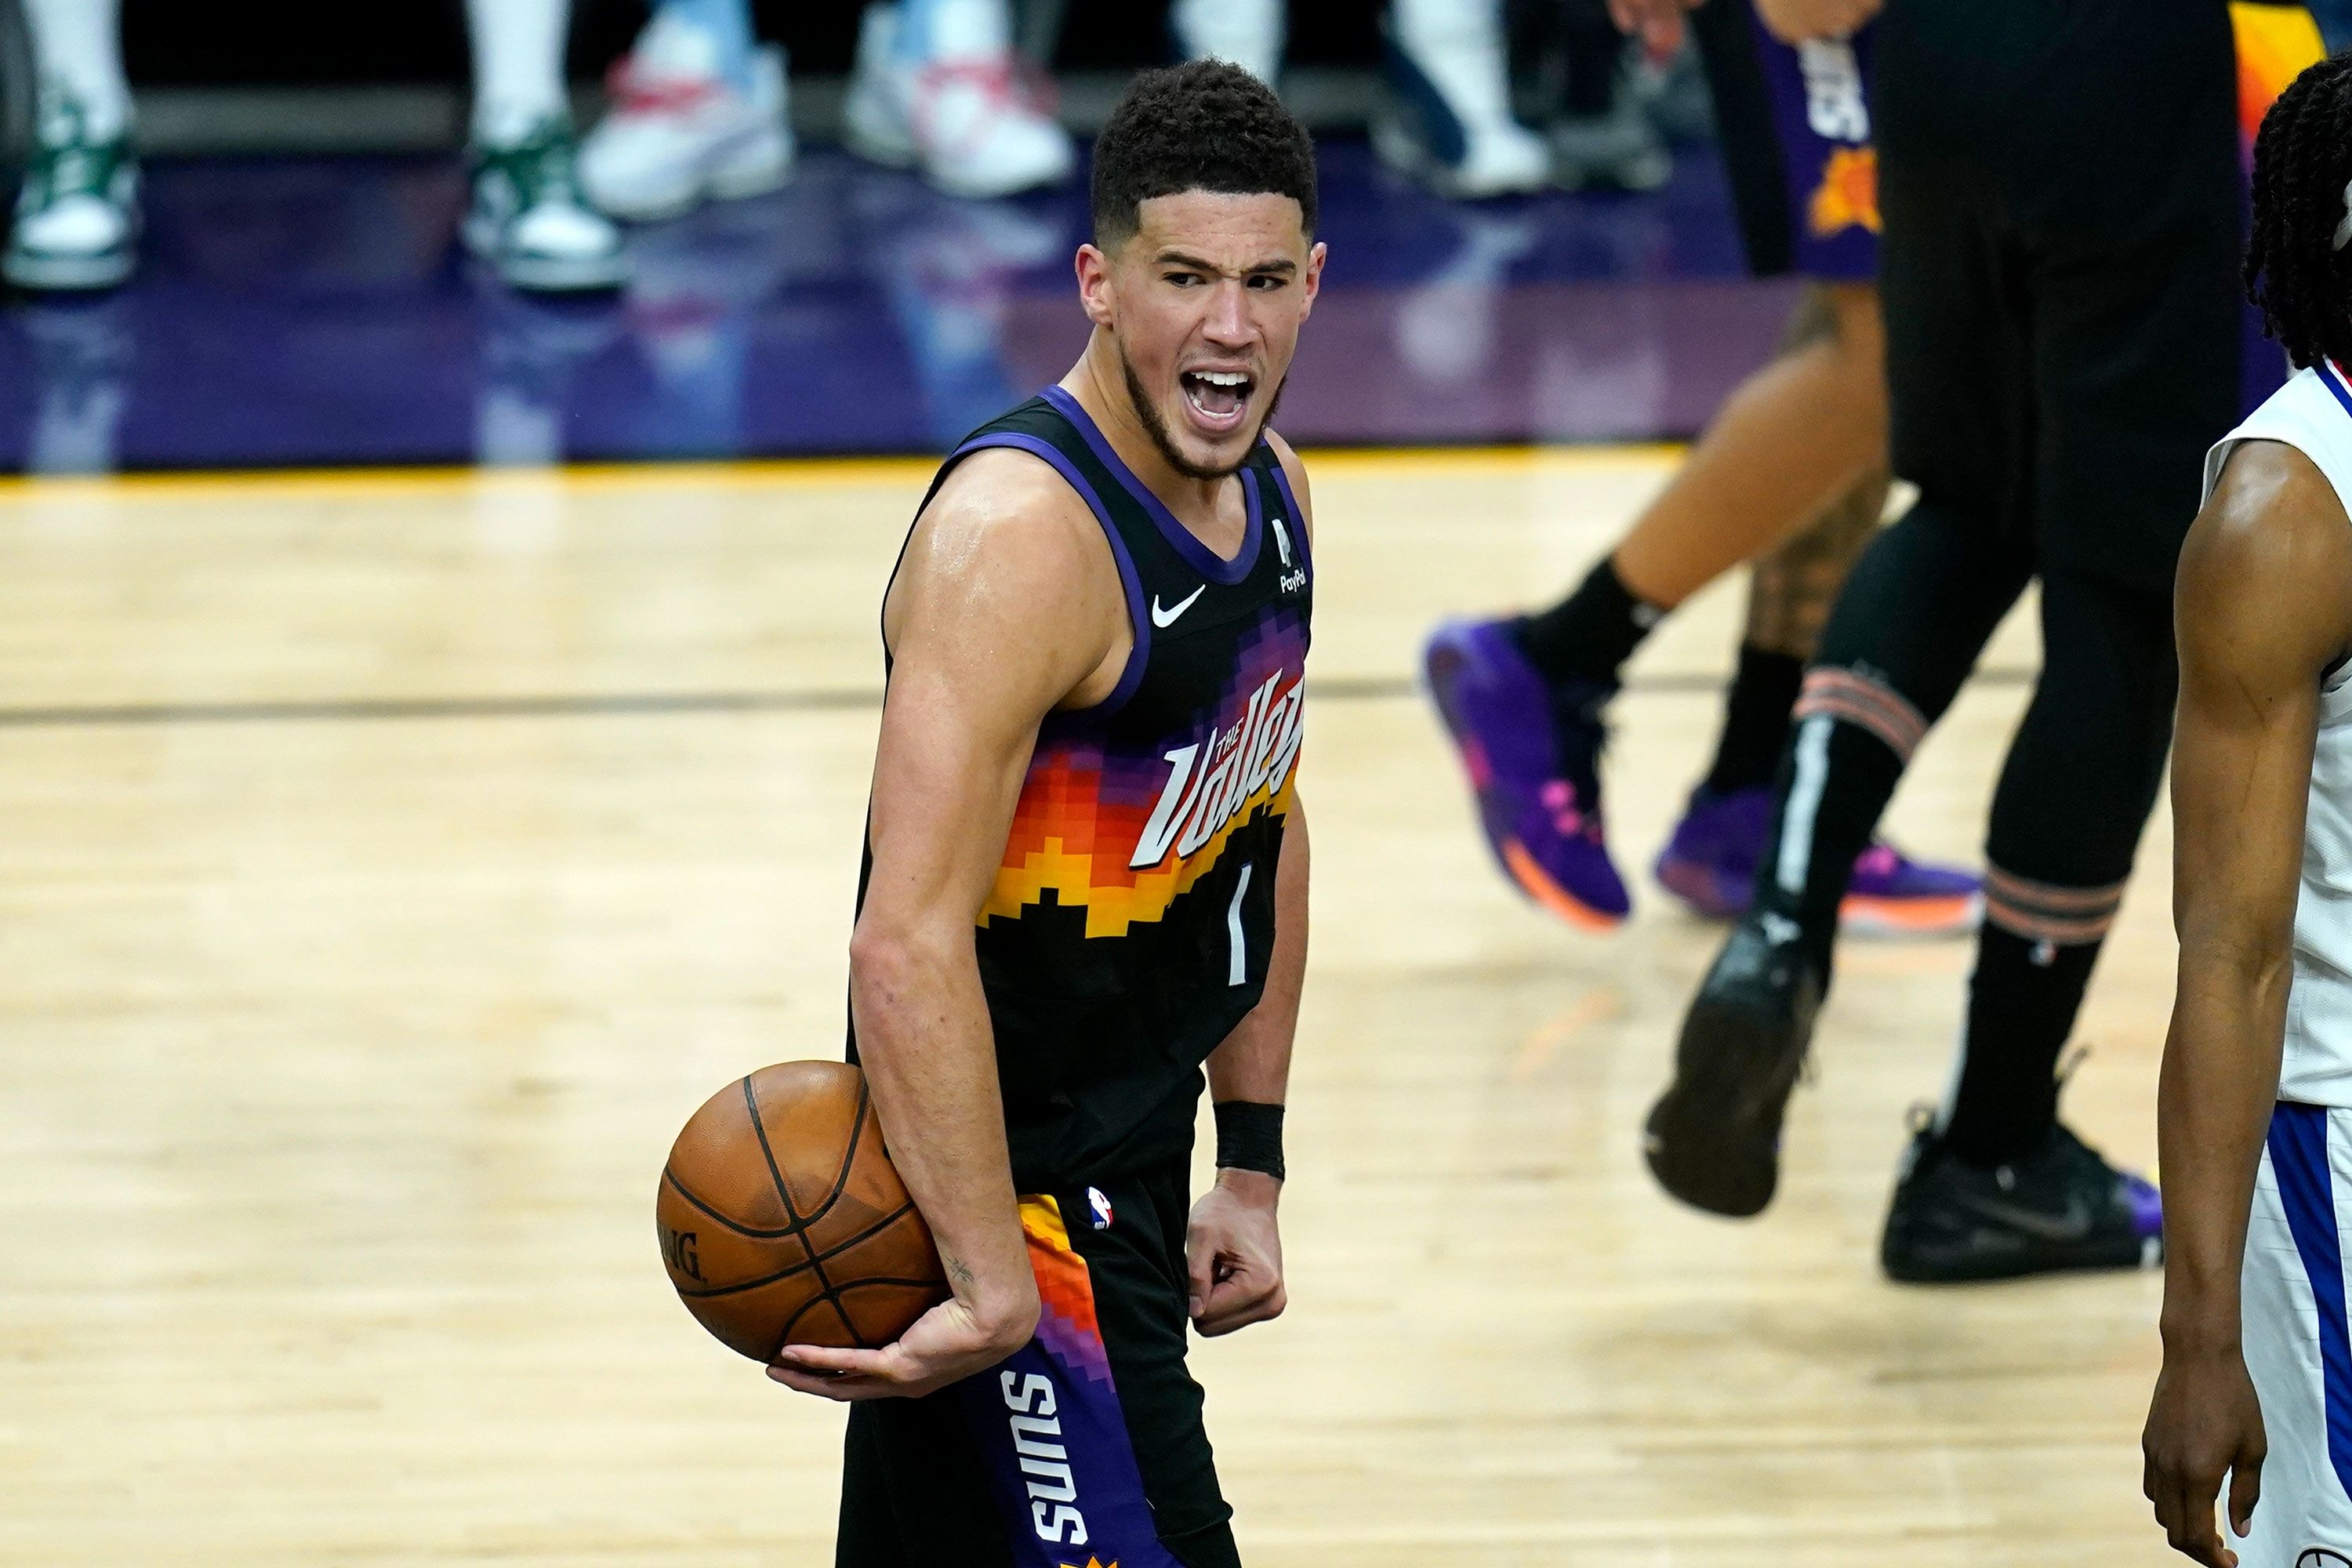 Suns move to 3-0 since NBA restart with Devin Booker buzzer beater against  Clippers